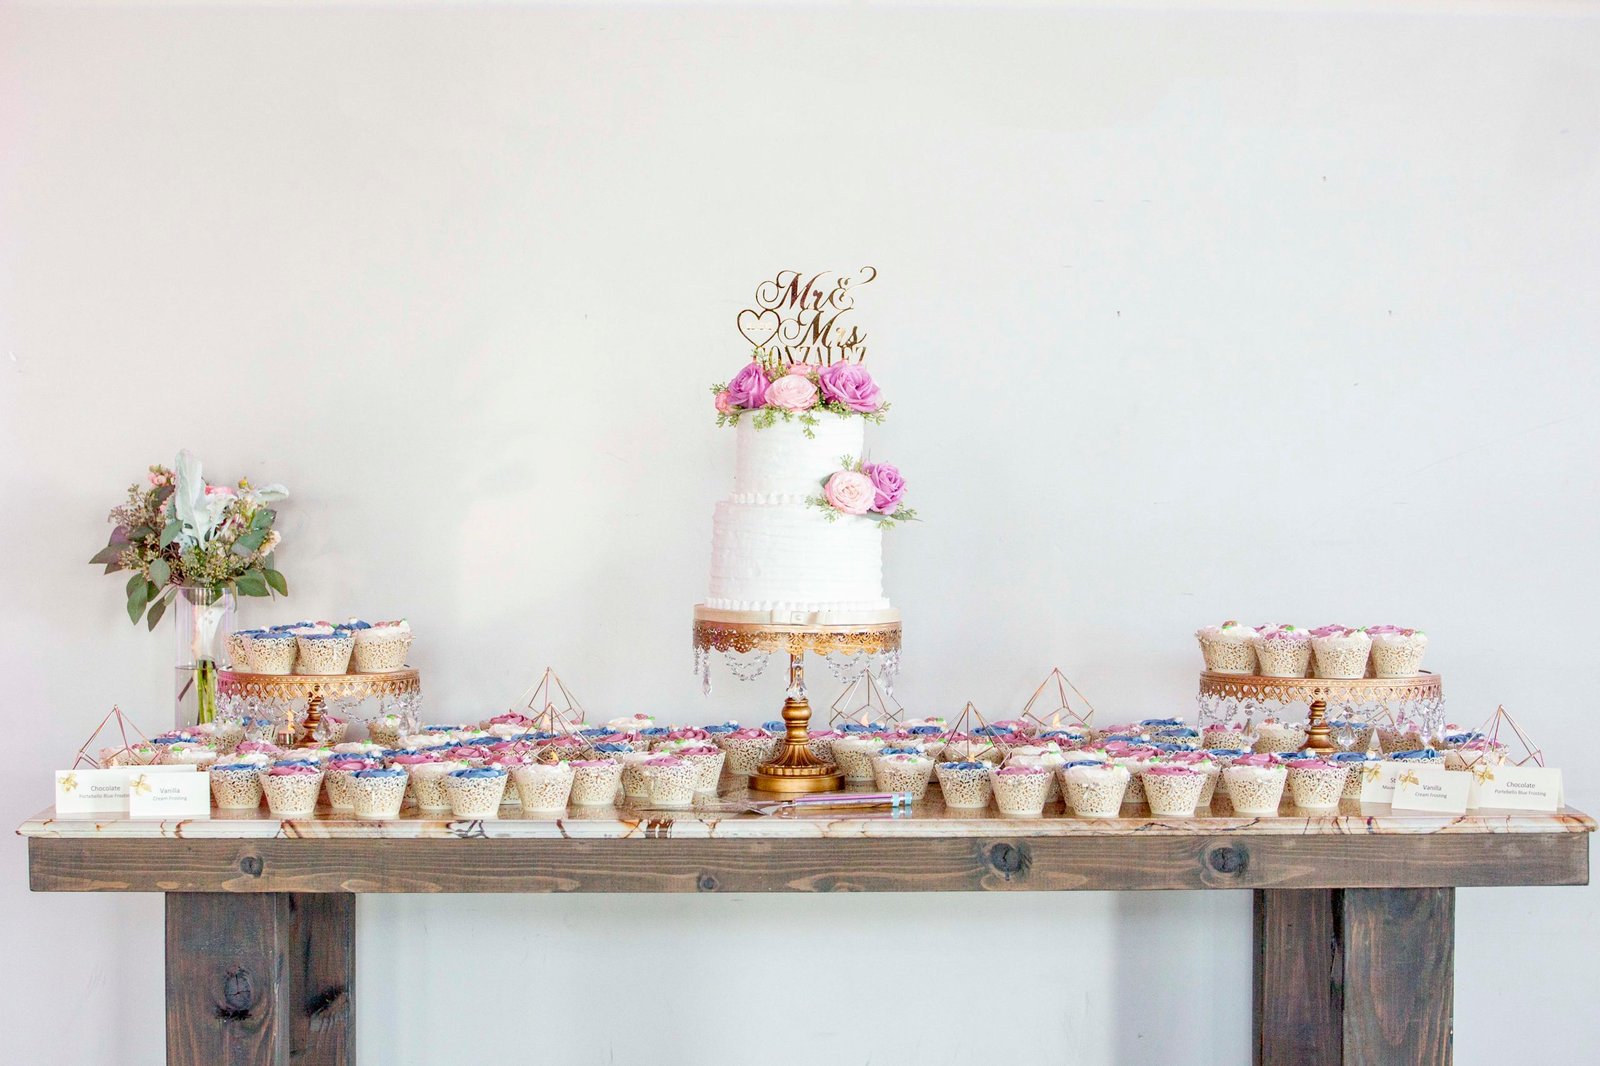 white wedding cake with pink flowers surrounded by cupcakes on a wood table